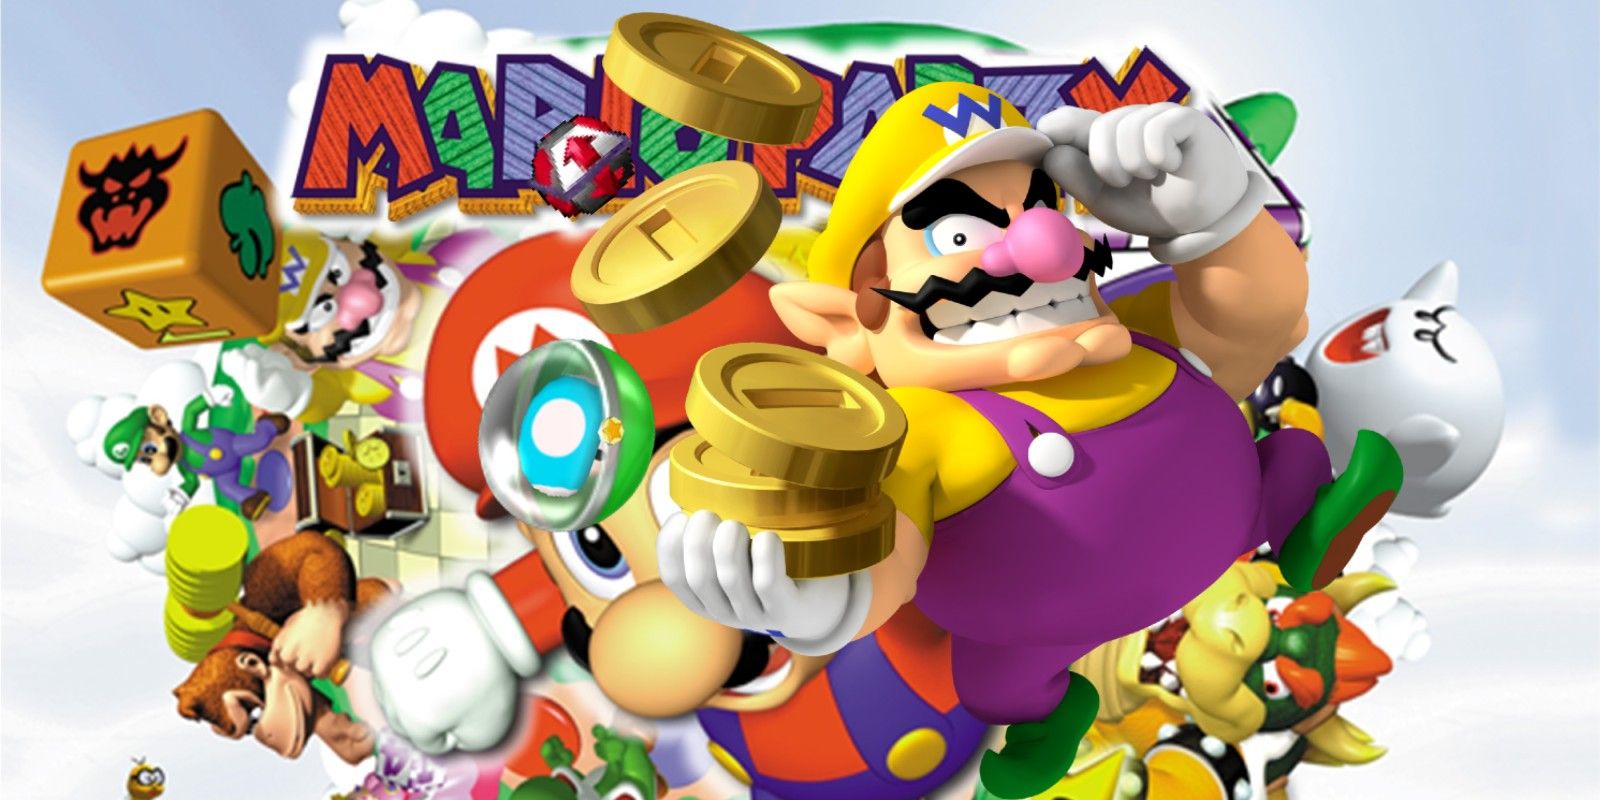 Wario with a Barter Box and Sluggish 'Shroom Orb from Mario Party